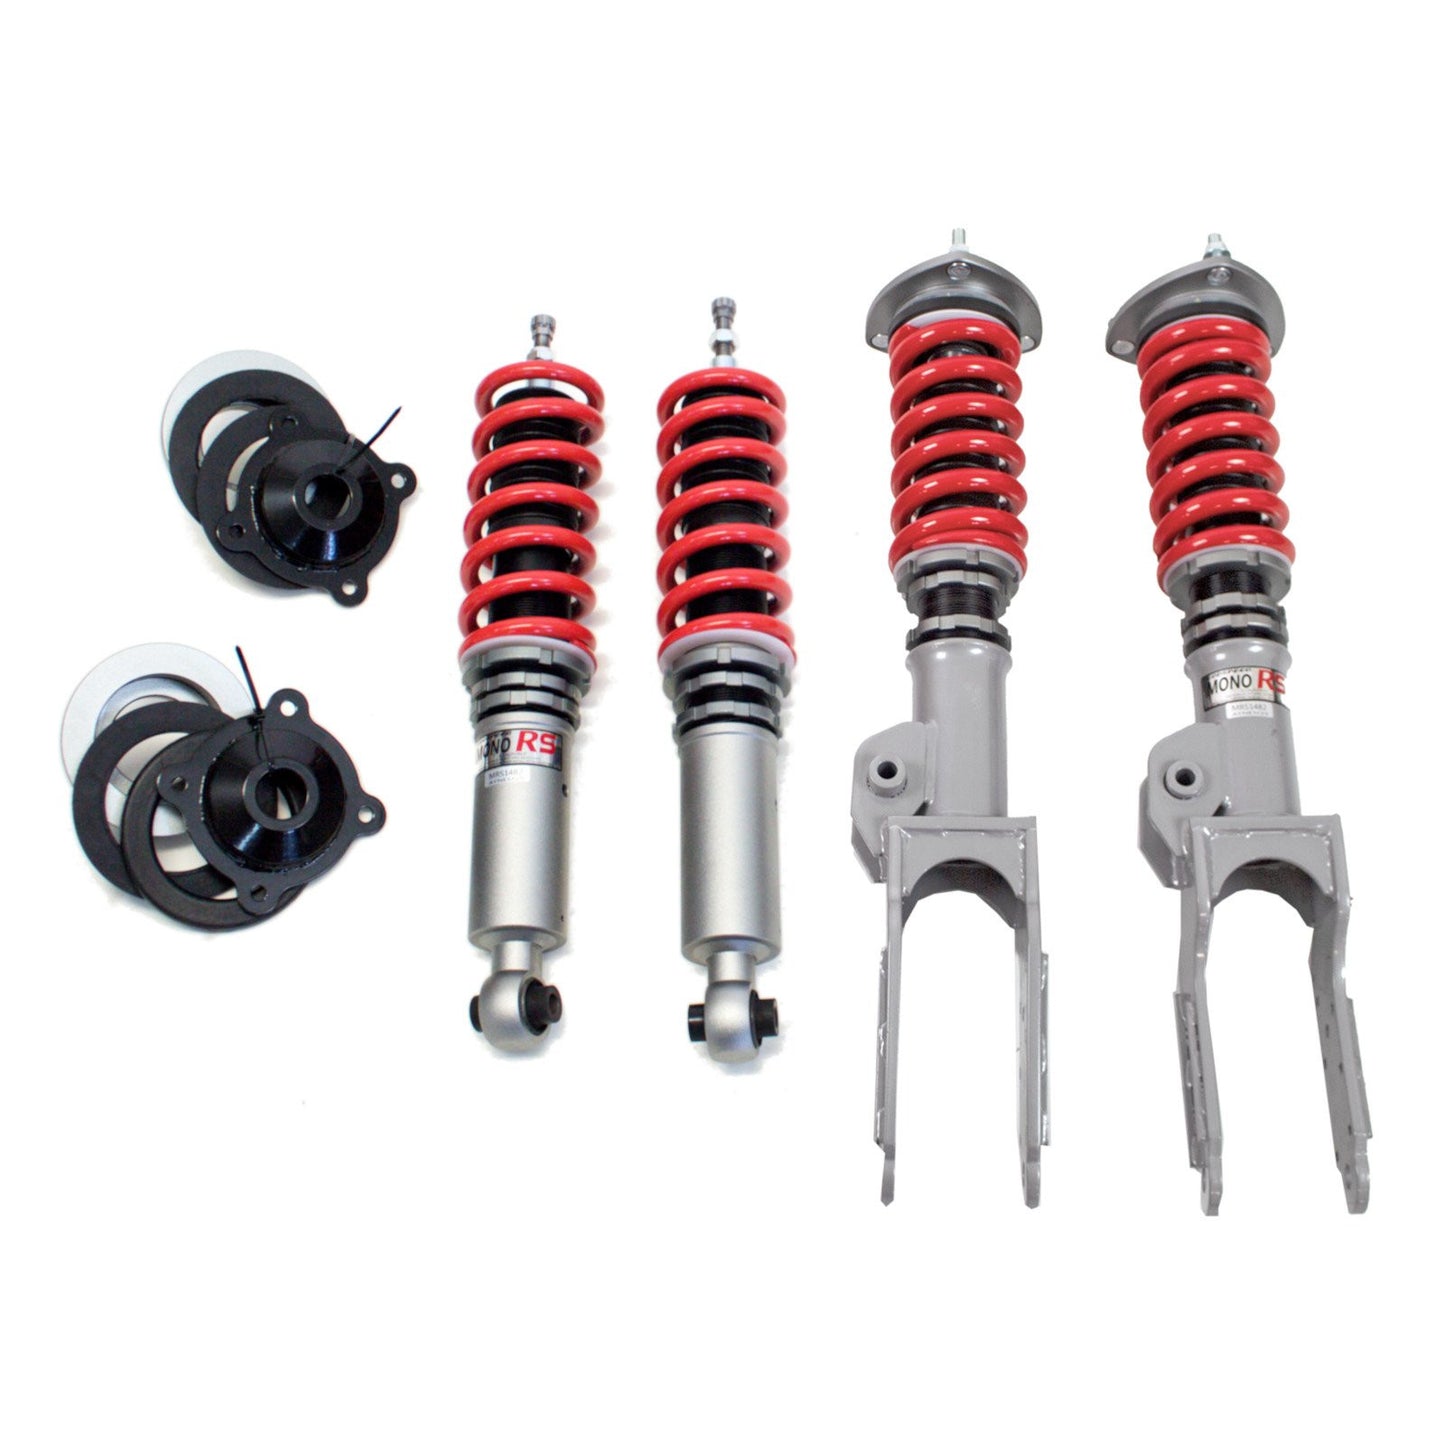 Godspeed MonoRS Coiloverfor Cayenne 958 12-18, Touareg 7L 12-17